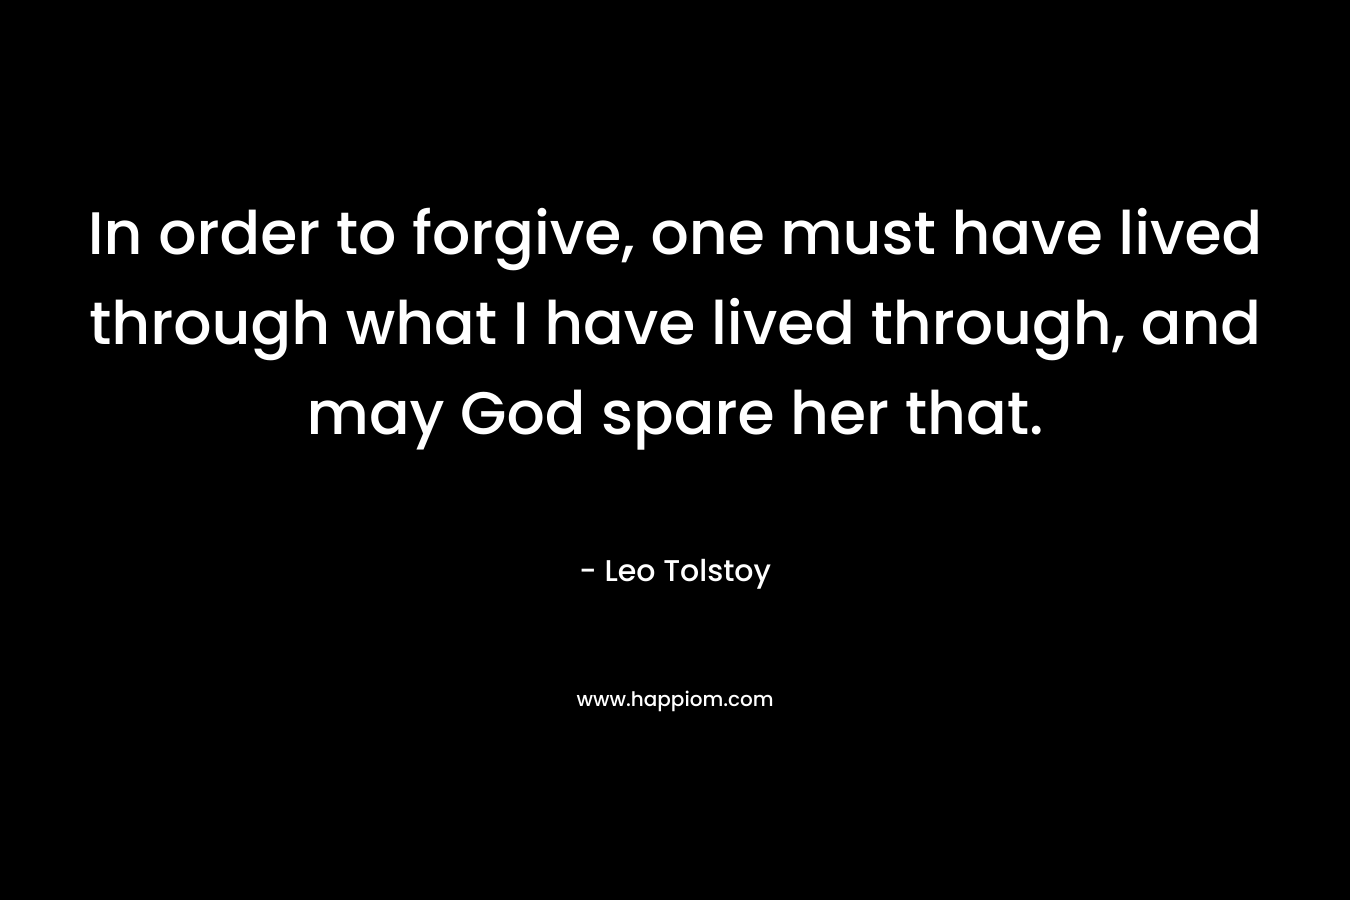 In order to forgive, one must have lived through what I have lived through, and may God spare her that. – Leo Tolstoy